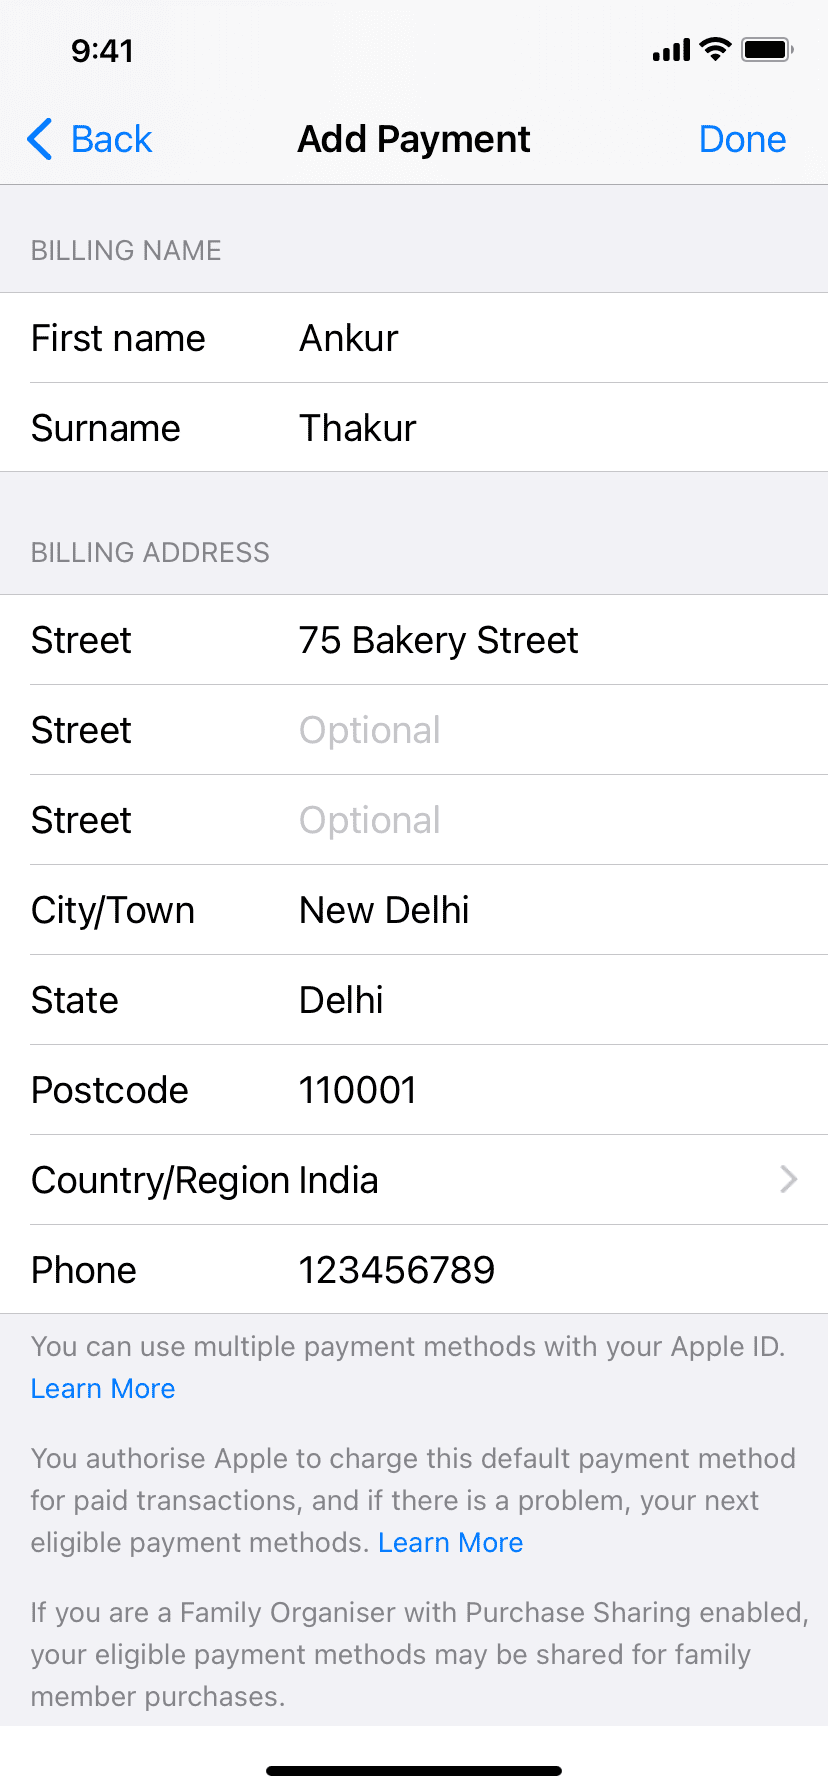 Add the billing address to your Apple ID